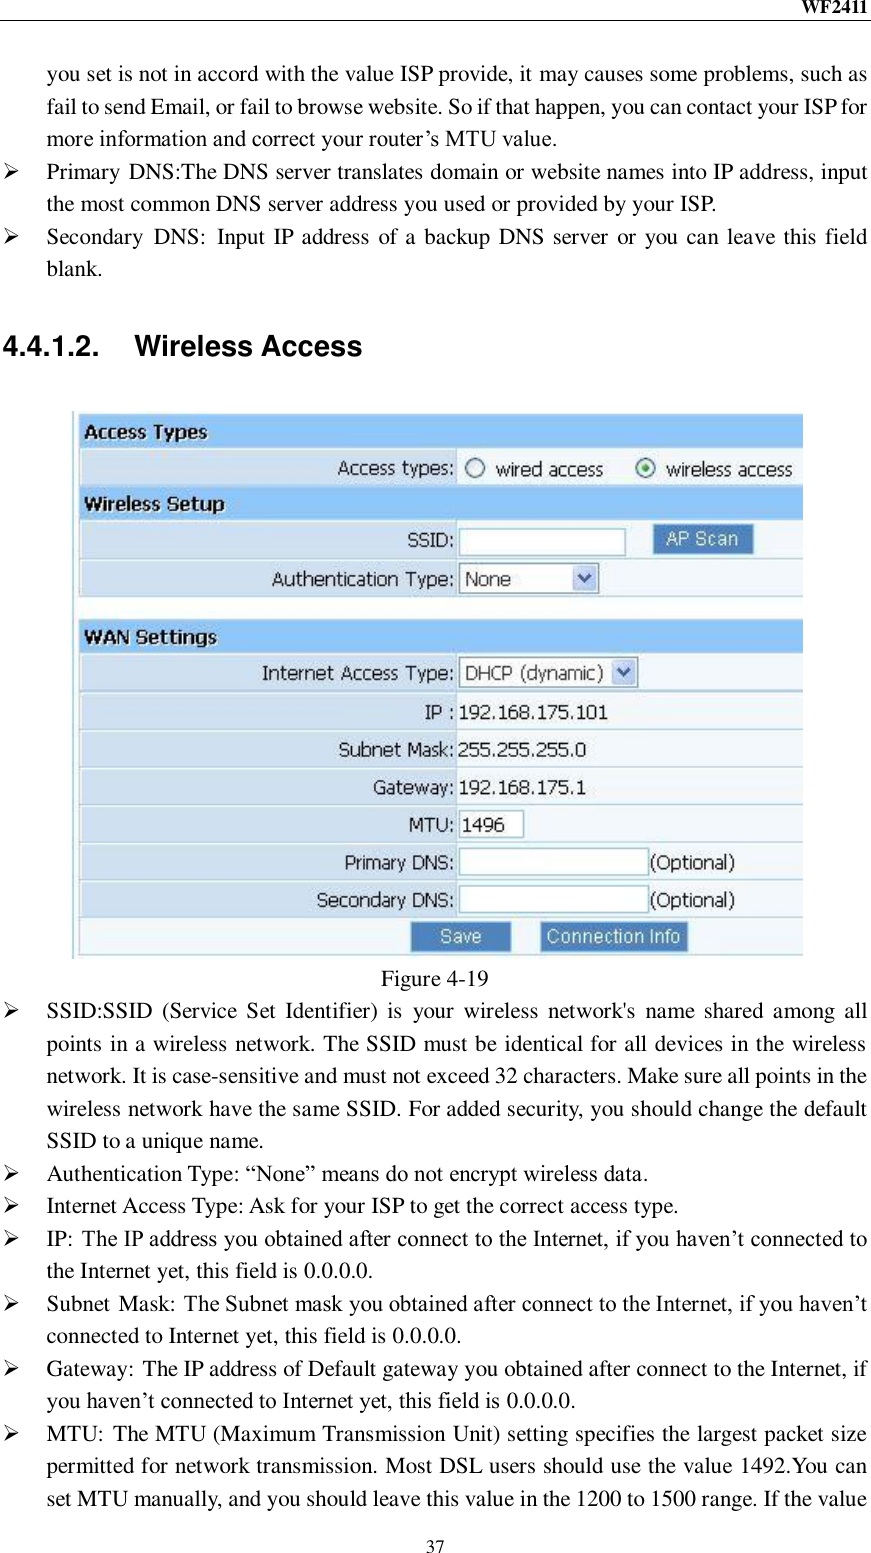 WF2411  37 you set is not in accord with the value ISP provide, it may causes some problems, such as fail to send Email, or fail to browse website. So if that happen, you can contact your ISP for more information and correct your router‟s MTU value.  Primary DNS:The DNS server translates domain or website names into IP address, input the most common DNS server address you used or provided by your ISP.  Secondary  DNS:  Input IP address of a backup DNS server or you can leave this field blank. 4.4.1.2.  Wireless Access  Figure 4-19  SSID:SSID (Service  Set  Identifier)  is  your  wireless  network&apos;s  name shared  among  all points in a wireless network. The SSID must be identical for all devices in the wireless network. It is case-sensitive and must not exceed 32 characters. Make sure all points in the wireless network have the same SSID. For added security, you should change the default SSID to a unique name.  Authentication Type: “None” means do not encrypt wireless data.  Internet Access Type: Ask for your ISP to get the correct access type.  IP: The IP address you obtained after connect to the Internet, if you haven‟t connected to the Internet yet, this field is 0.0.0.0.  Subnet Mask: The Subnet mask you obtained after connect to the Internet, if you haven‟t connected to Internet yet, this field is 0.0.0.0.  Gateway: The IP address of Default gateway you obtained after connect to the Internet, if you haven‟t connected to Internet yet, this field is 0.0.0.0.  MTU:  The MTU (Maximum Transmission Unit) setting specifies the largest packet size permitted for network transmission. Most DSL users should use the value 1492.You can set MTU manually, and you should leave this value in the 1200 to 1500 range. If the value 